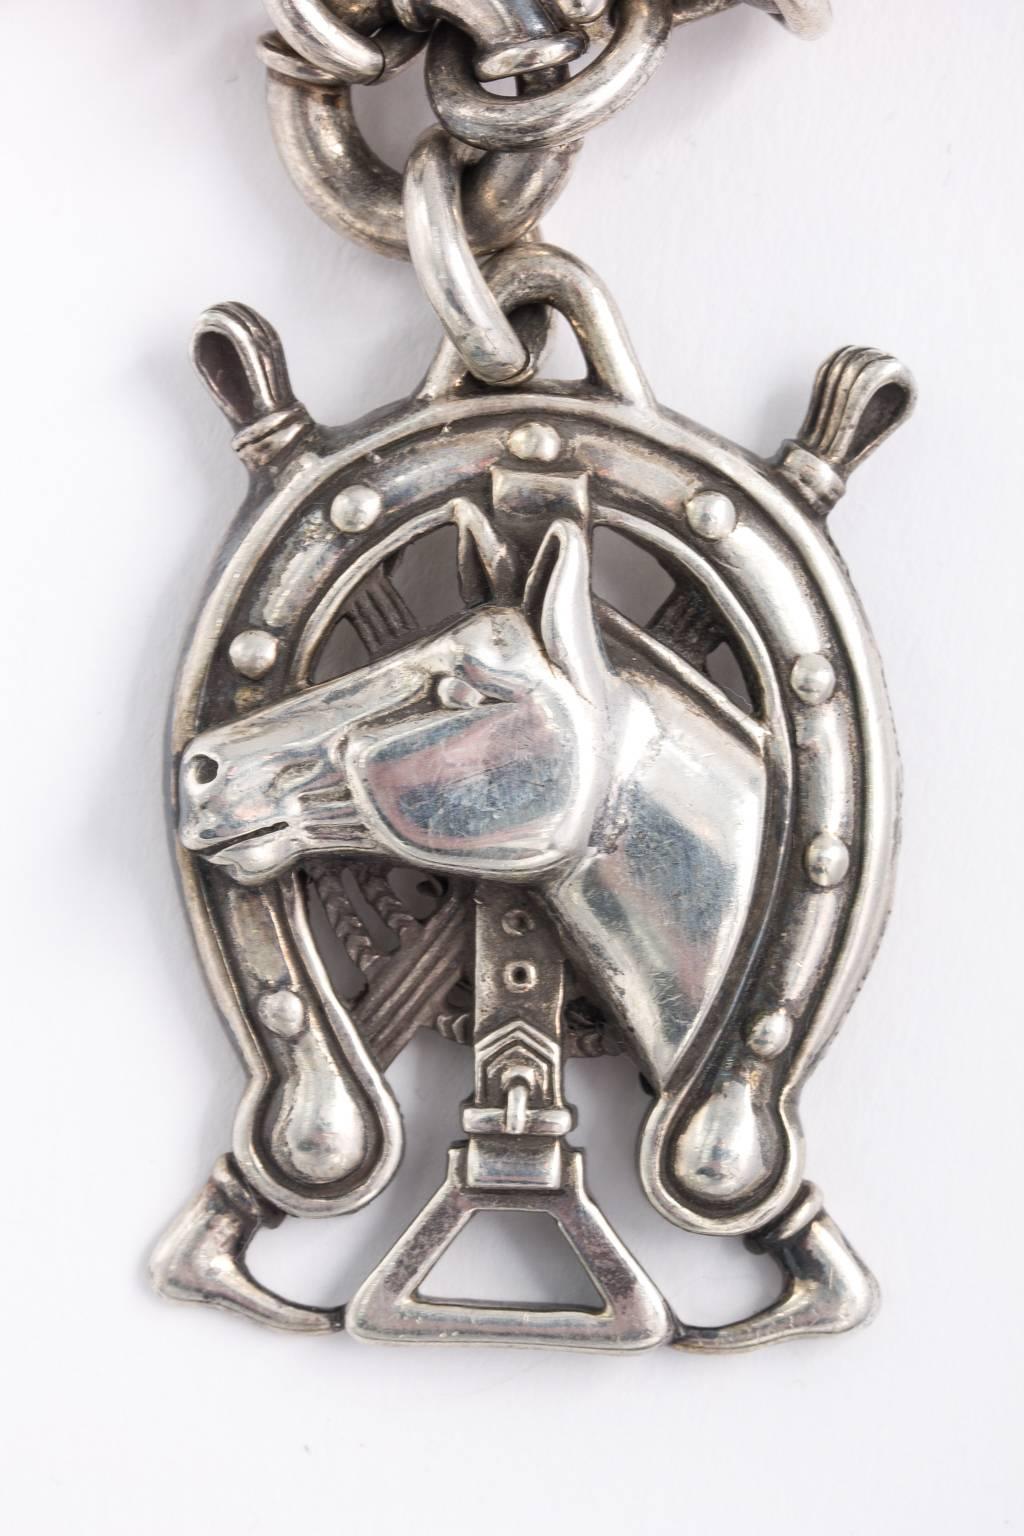 Kieselstein woven leather necklace featuring sterling silver rare horse motif pendant. Necklace measures 16.00 inches when clasped. pendant is another 2 inches in length.
PERIOD:1980s-Present
MATERIALS:Leather, Silver
